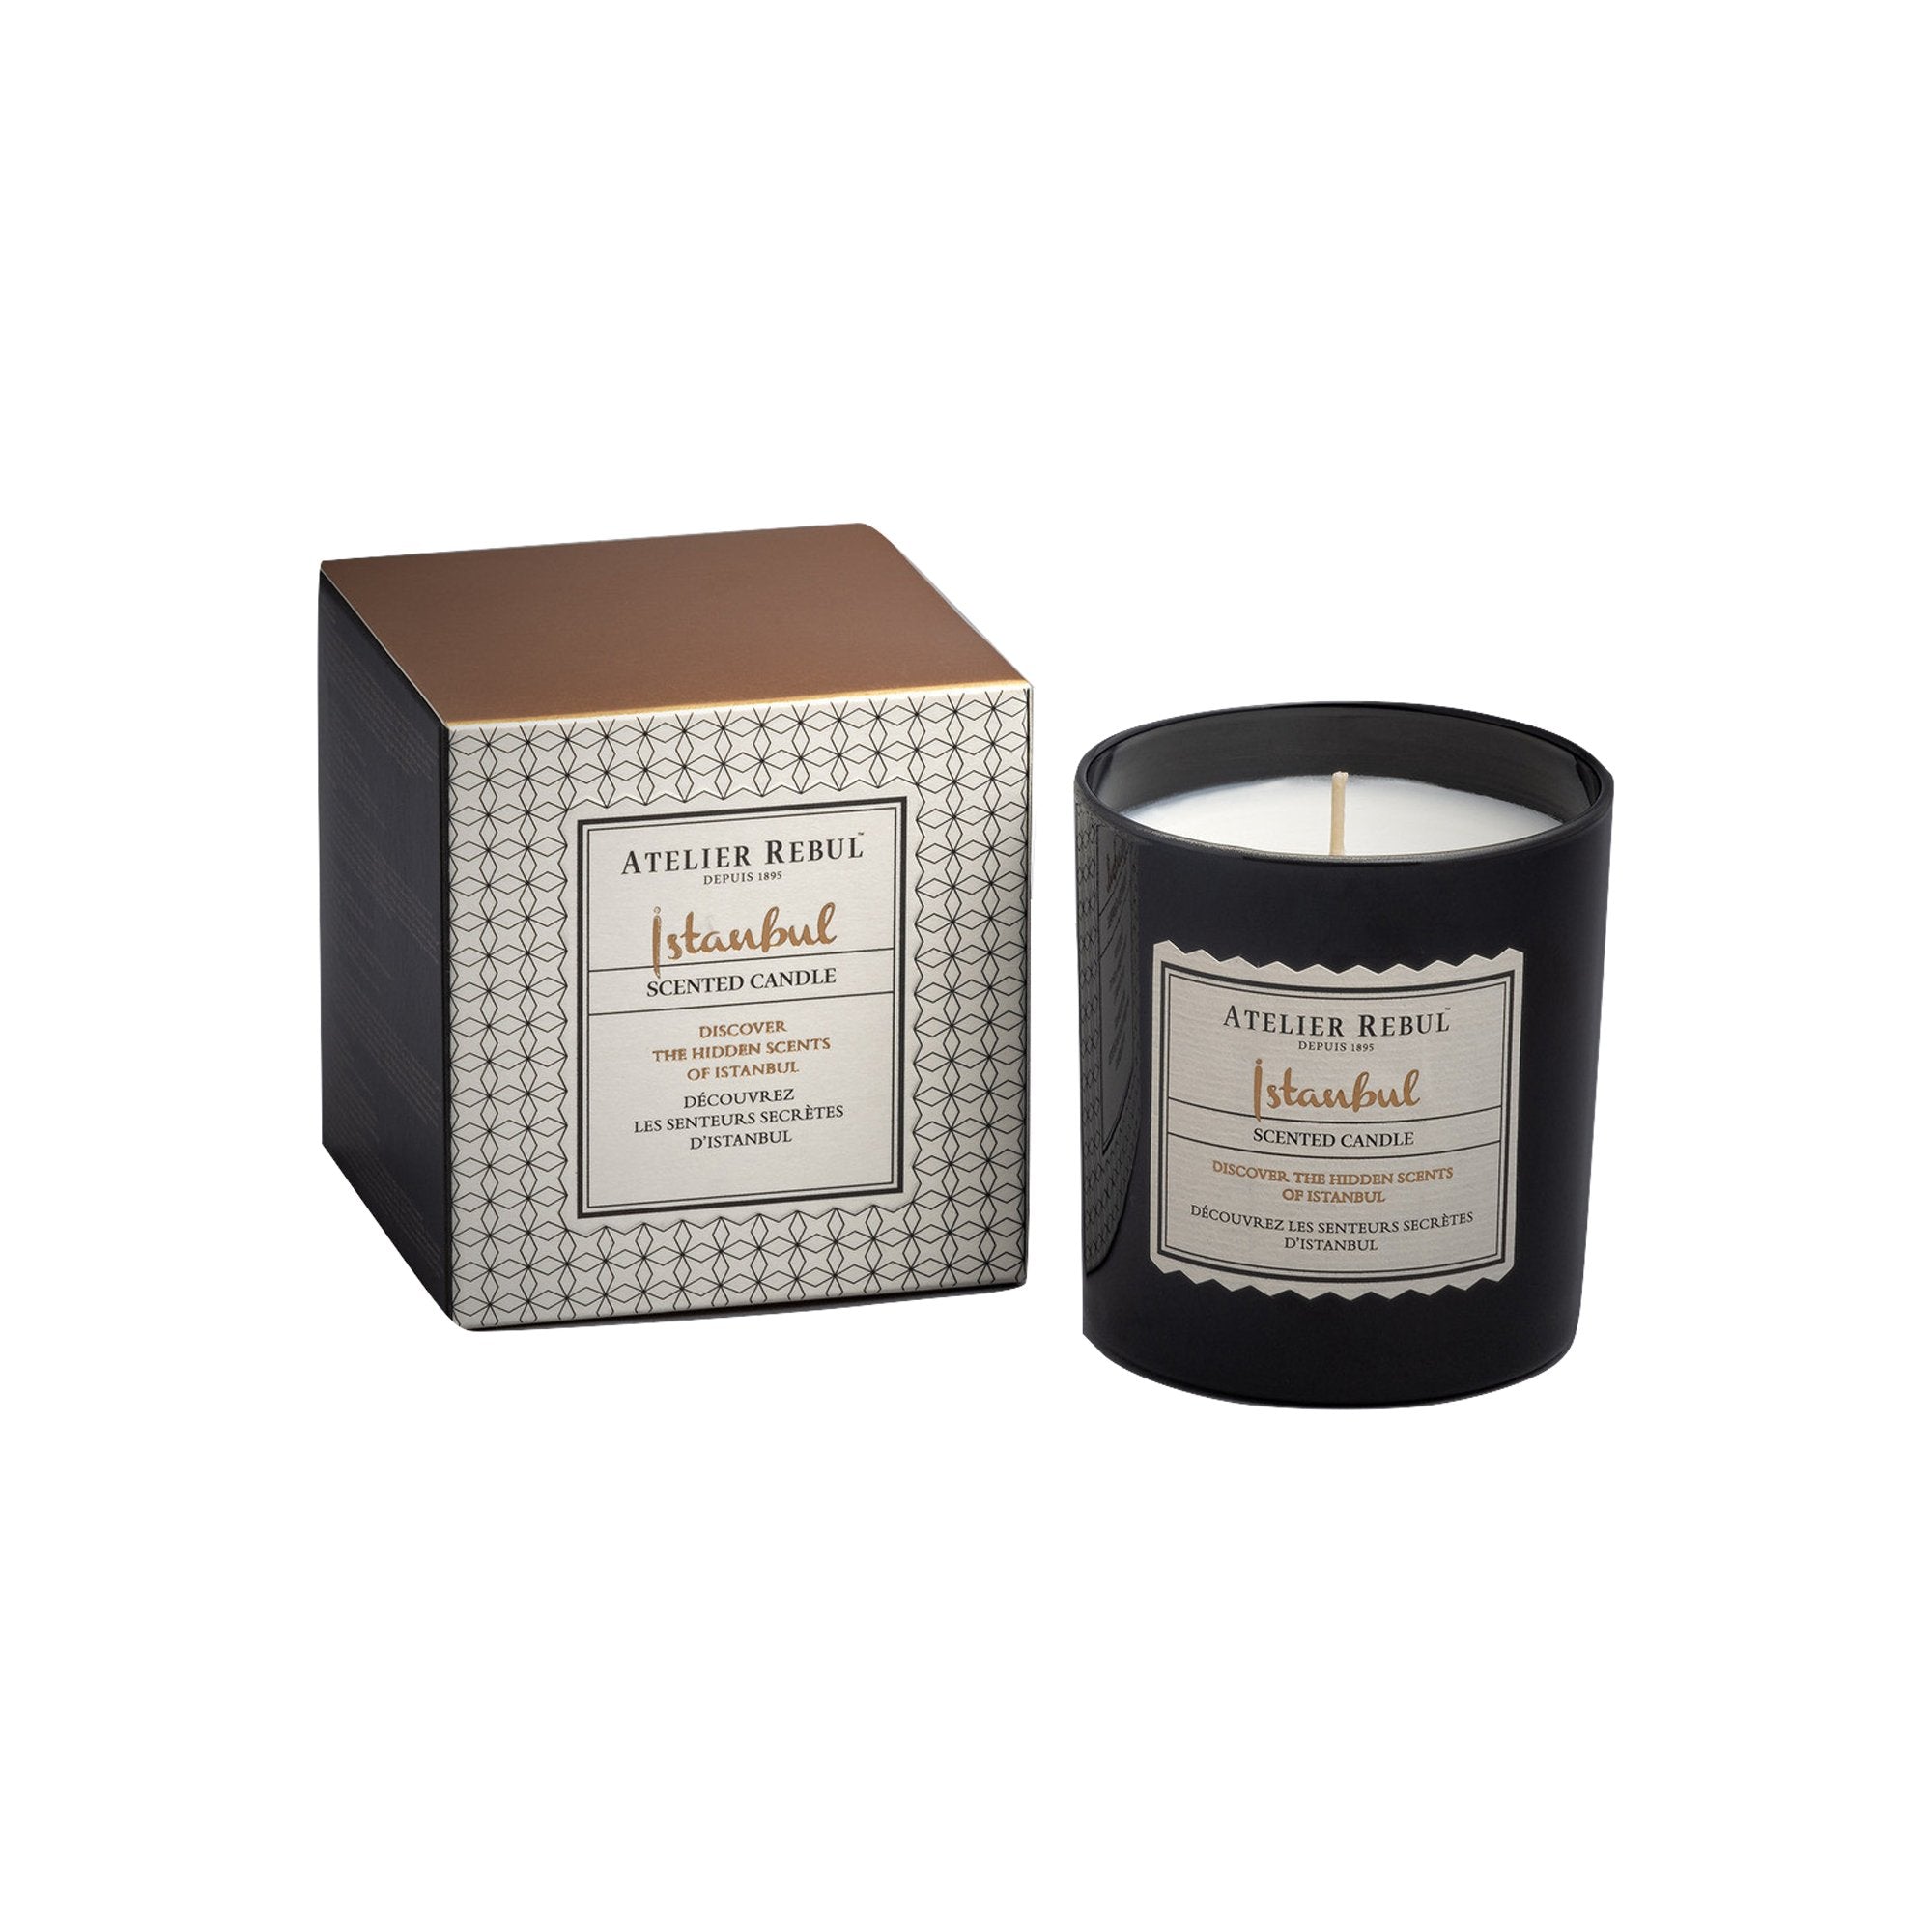 Istanbul Scented Candle 235g | Atelier Rebul Webshop